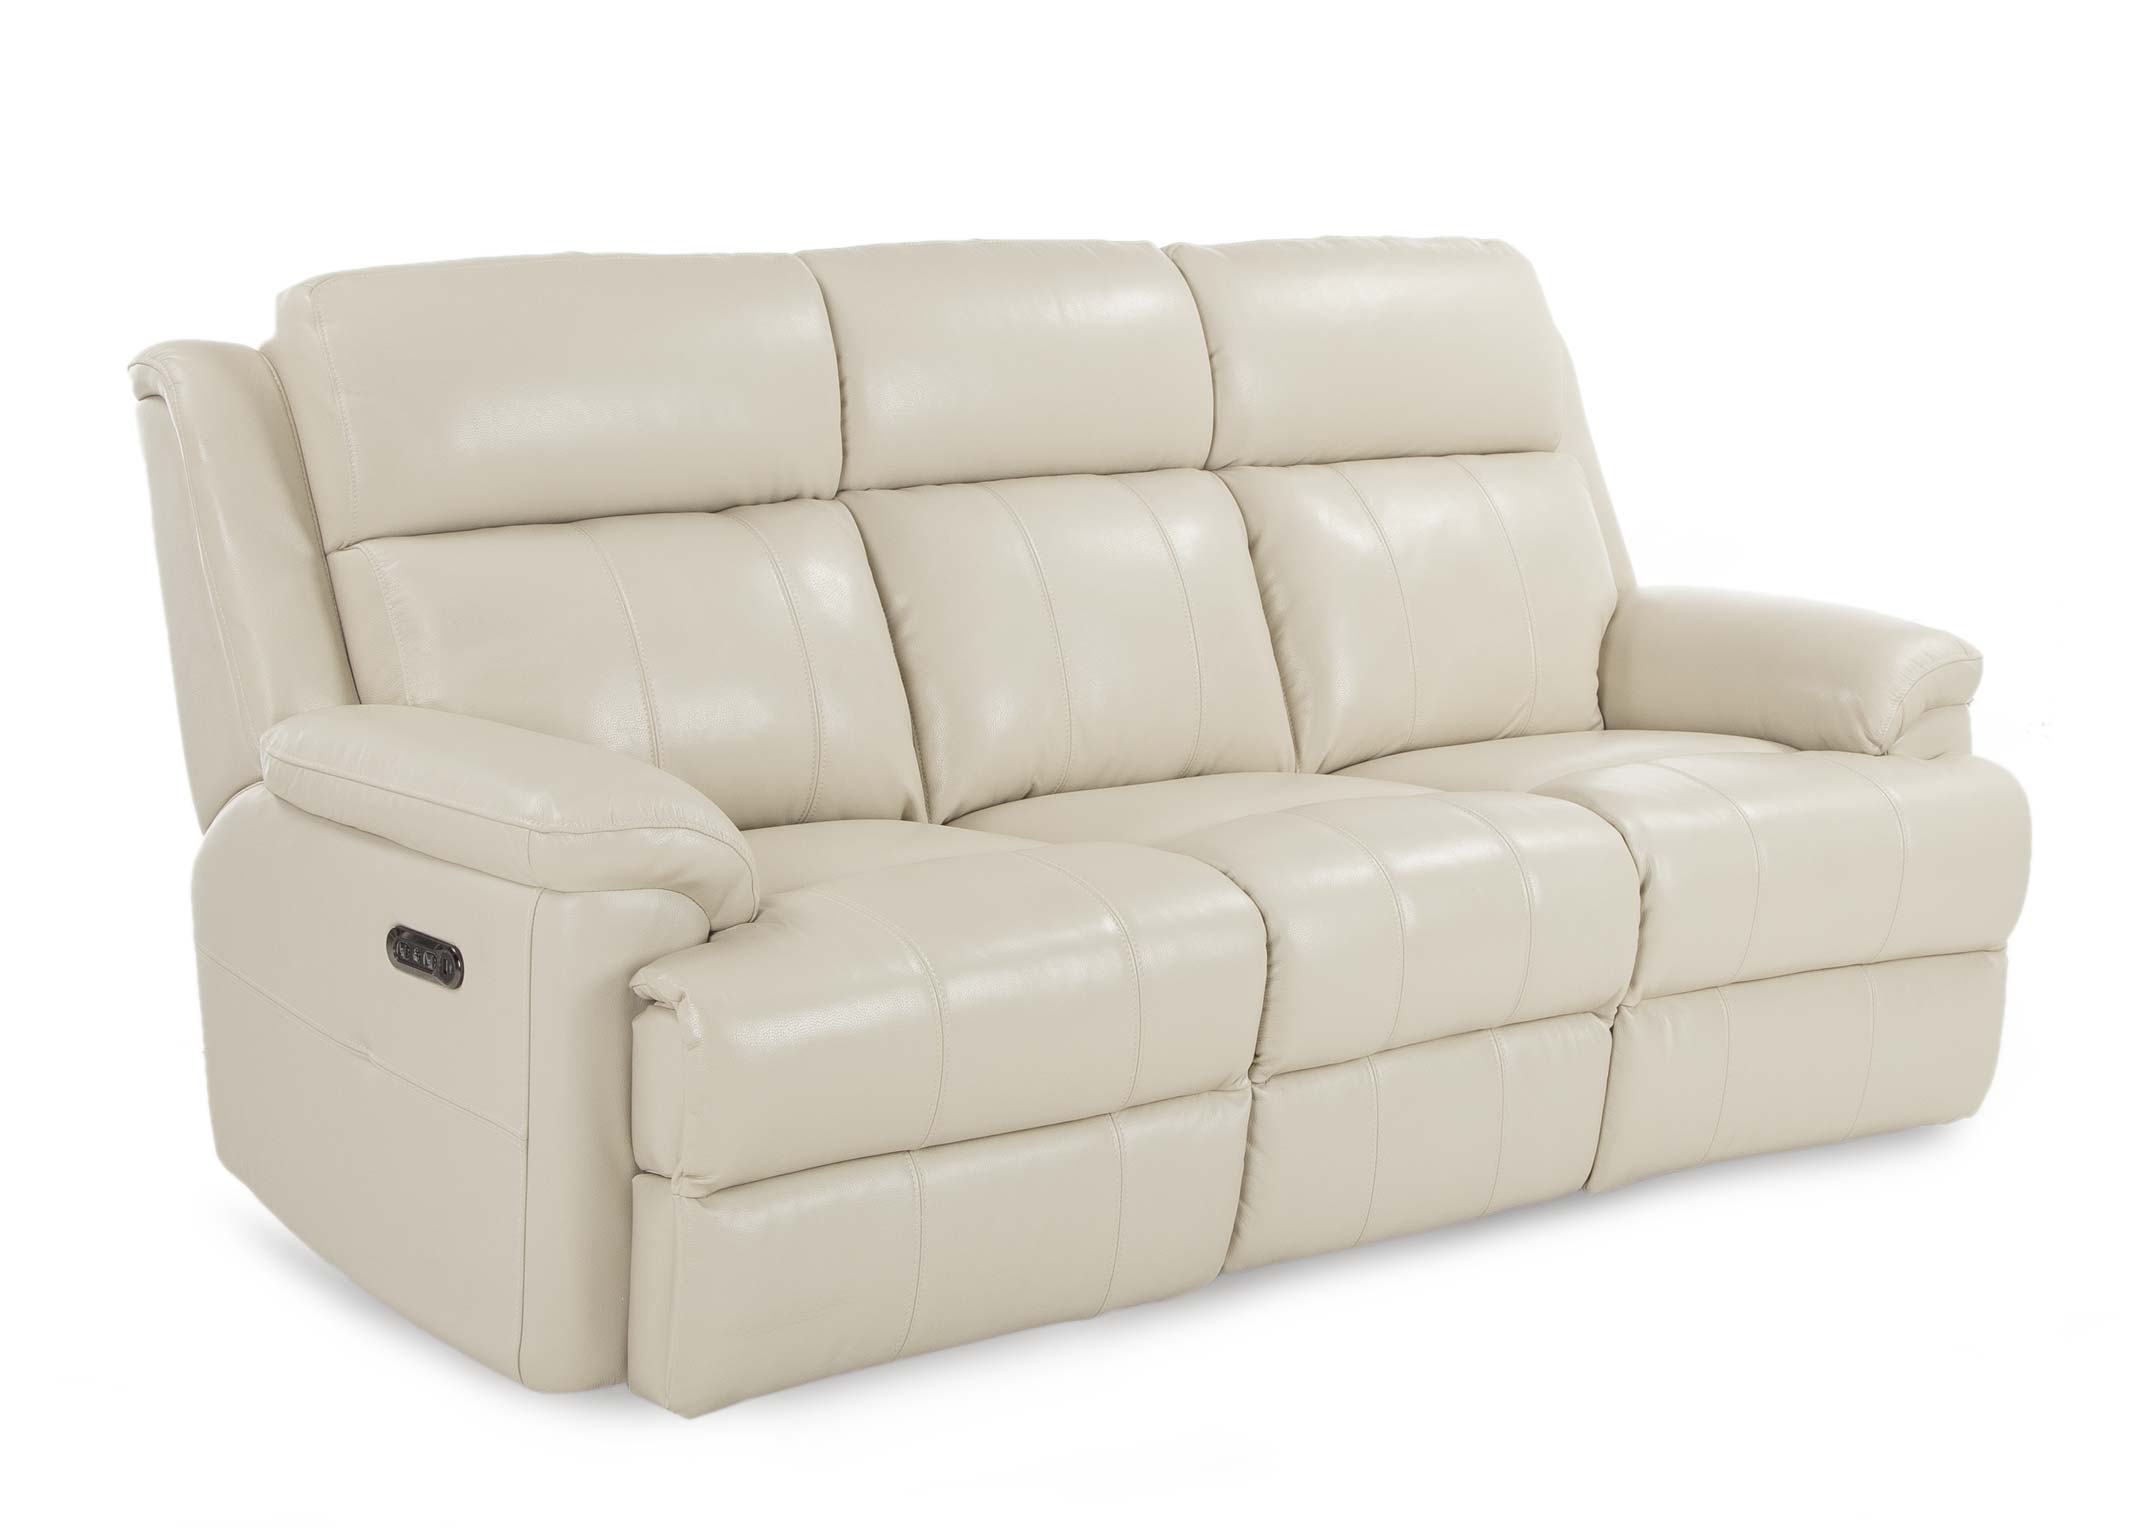 Recliner Armchairs Sofas Ireland, Off White Leather Recliners